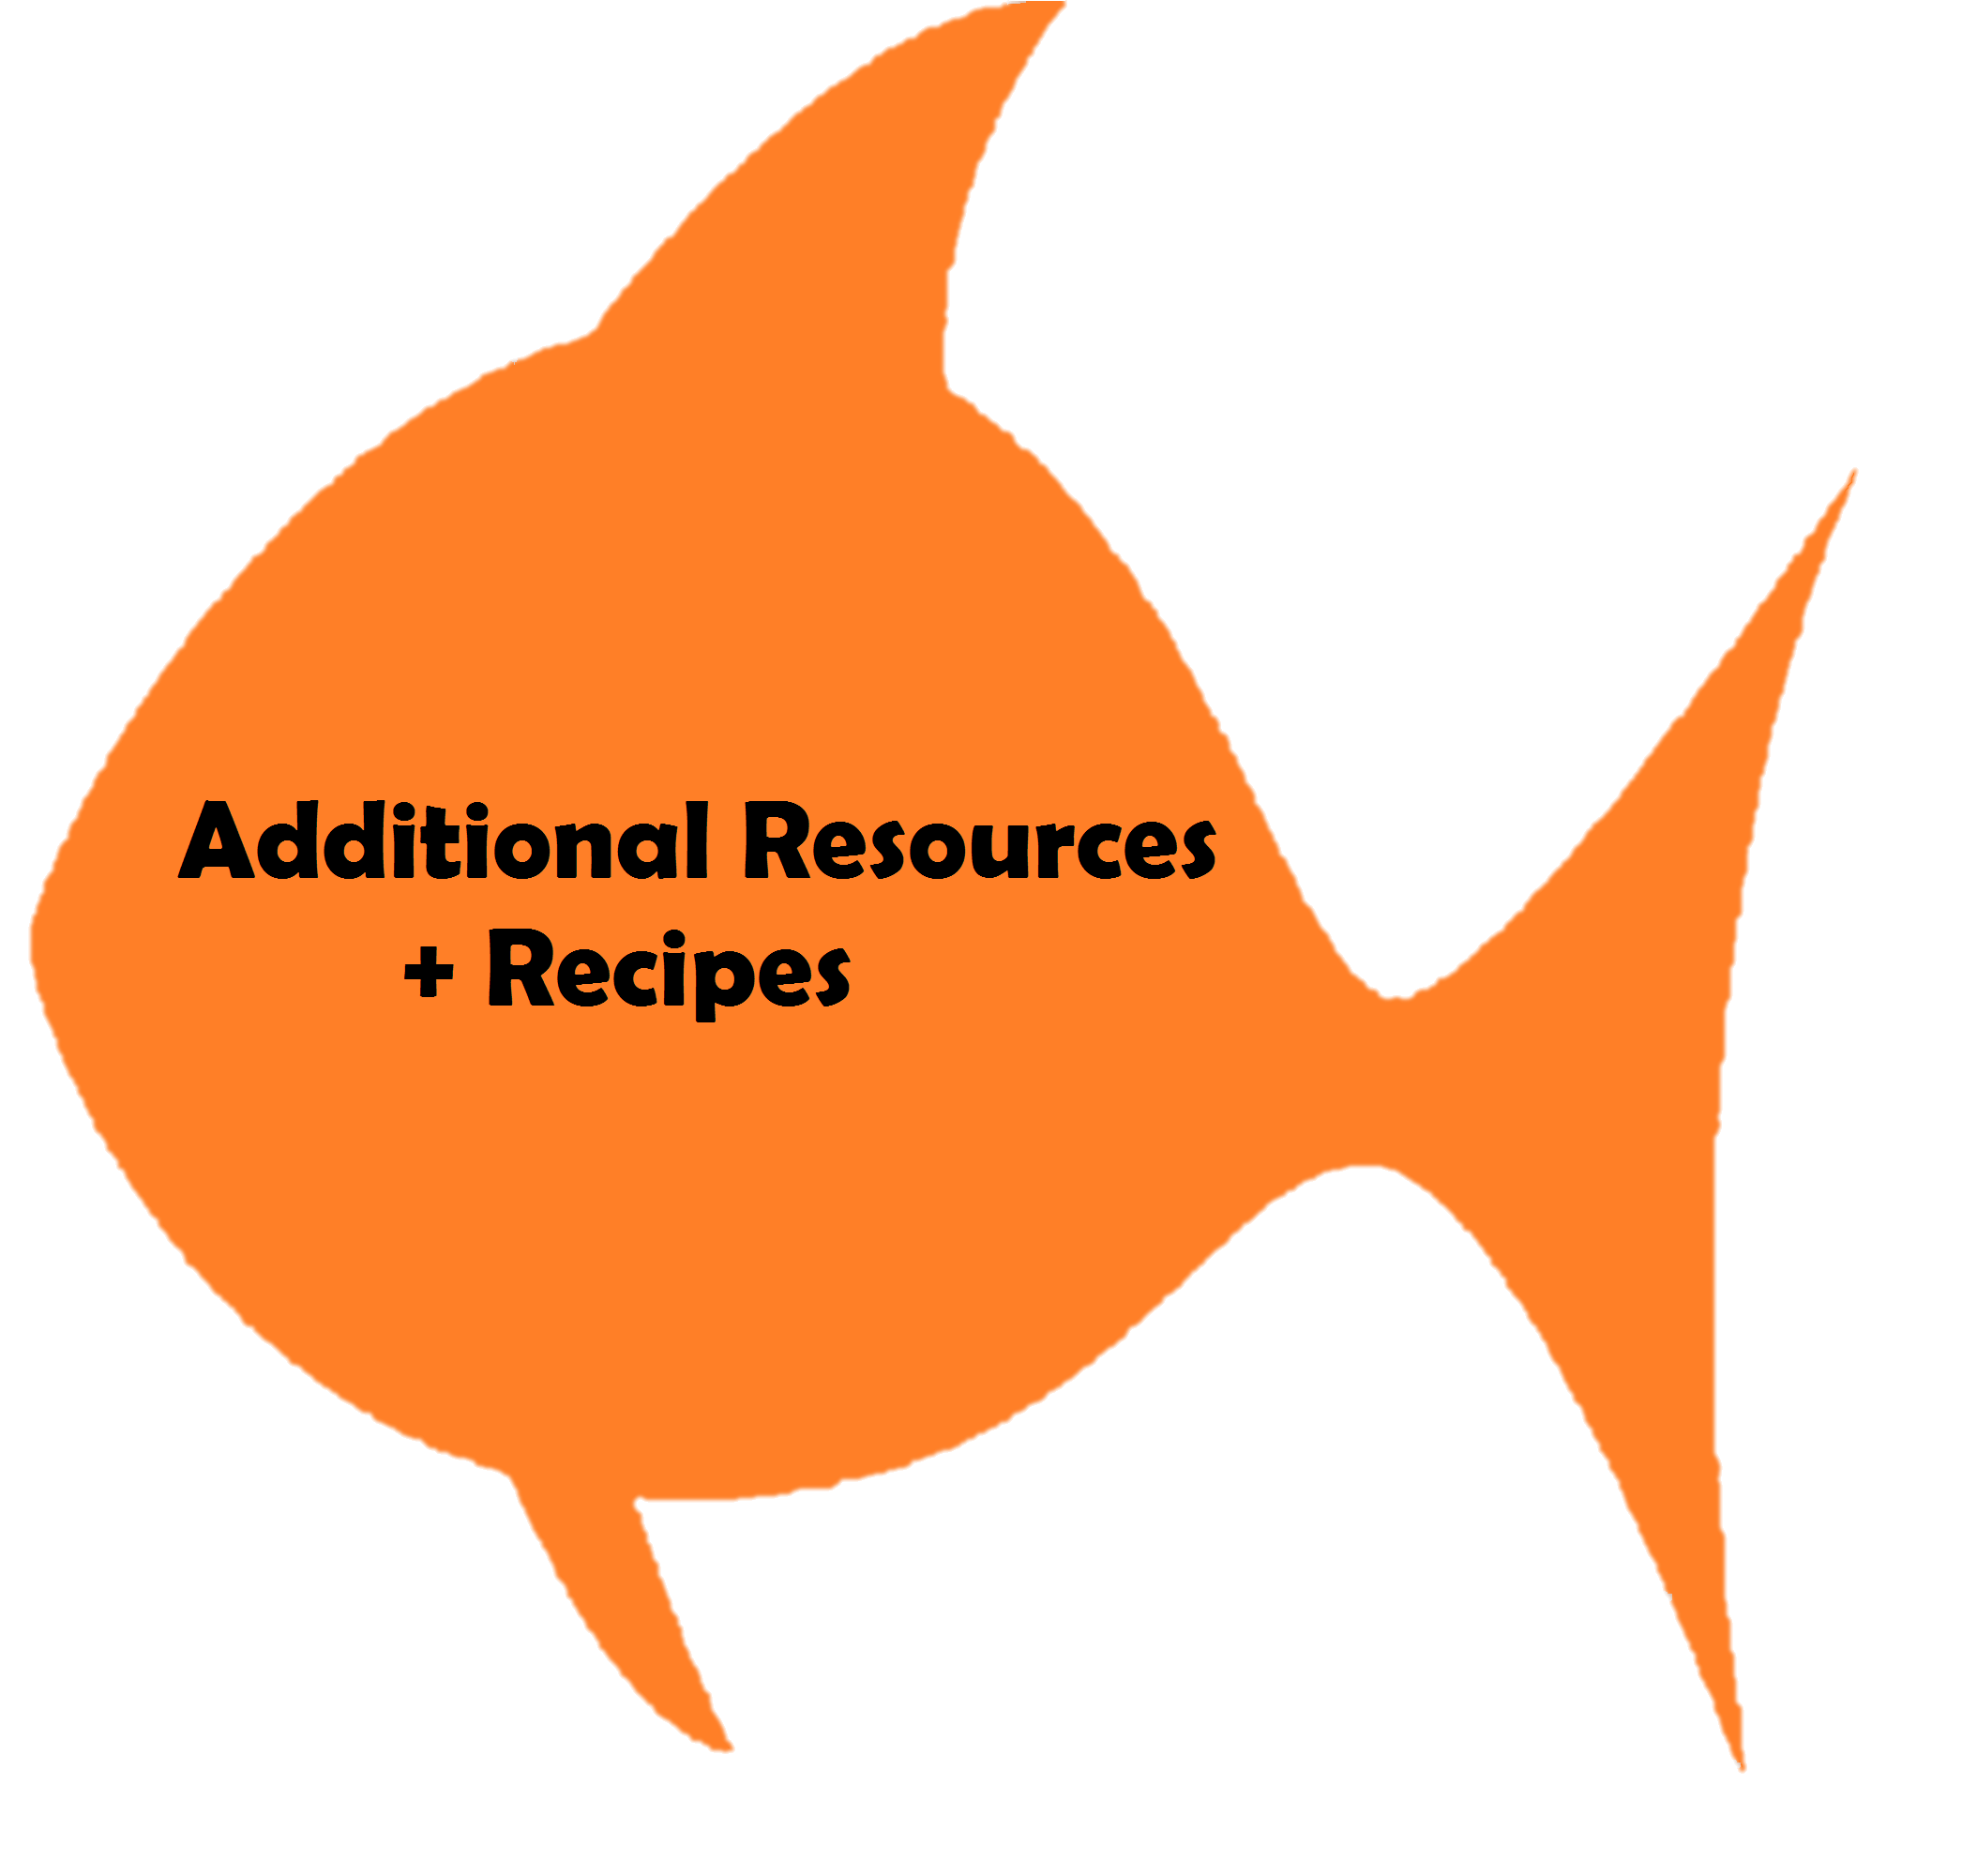 Additional Resources and Recipes Bubble